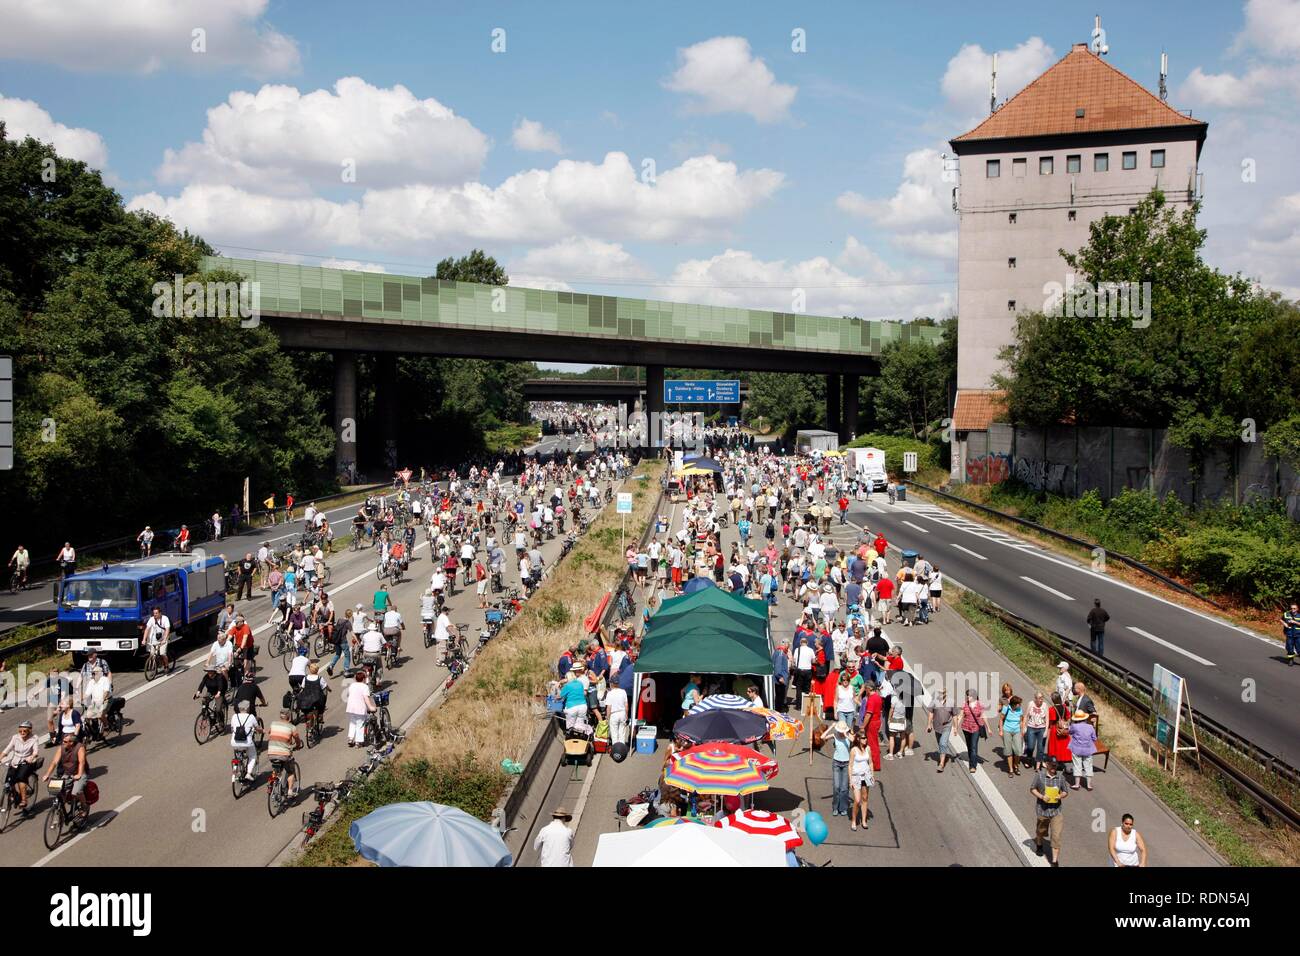 The Duisburg-Kaiserberg junction at the Still-Leben art event on the Ruhrschnellweg A40 motorway, largest event of the Capital Stock Photo